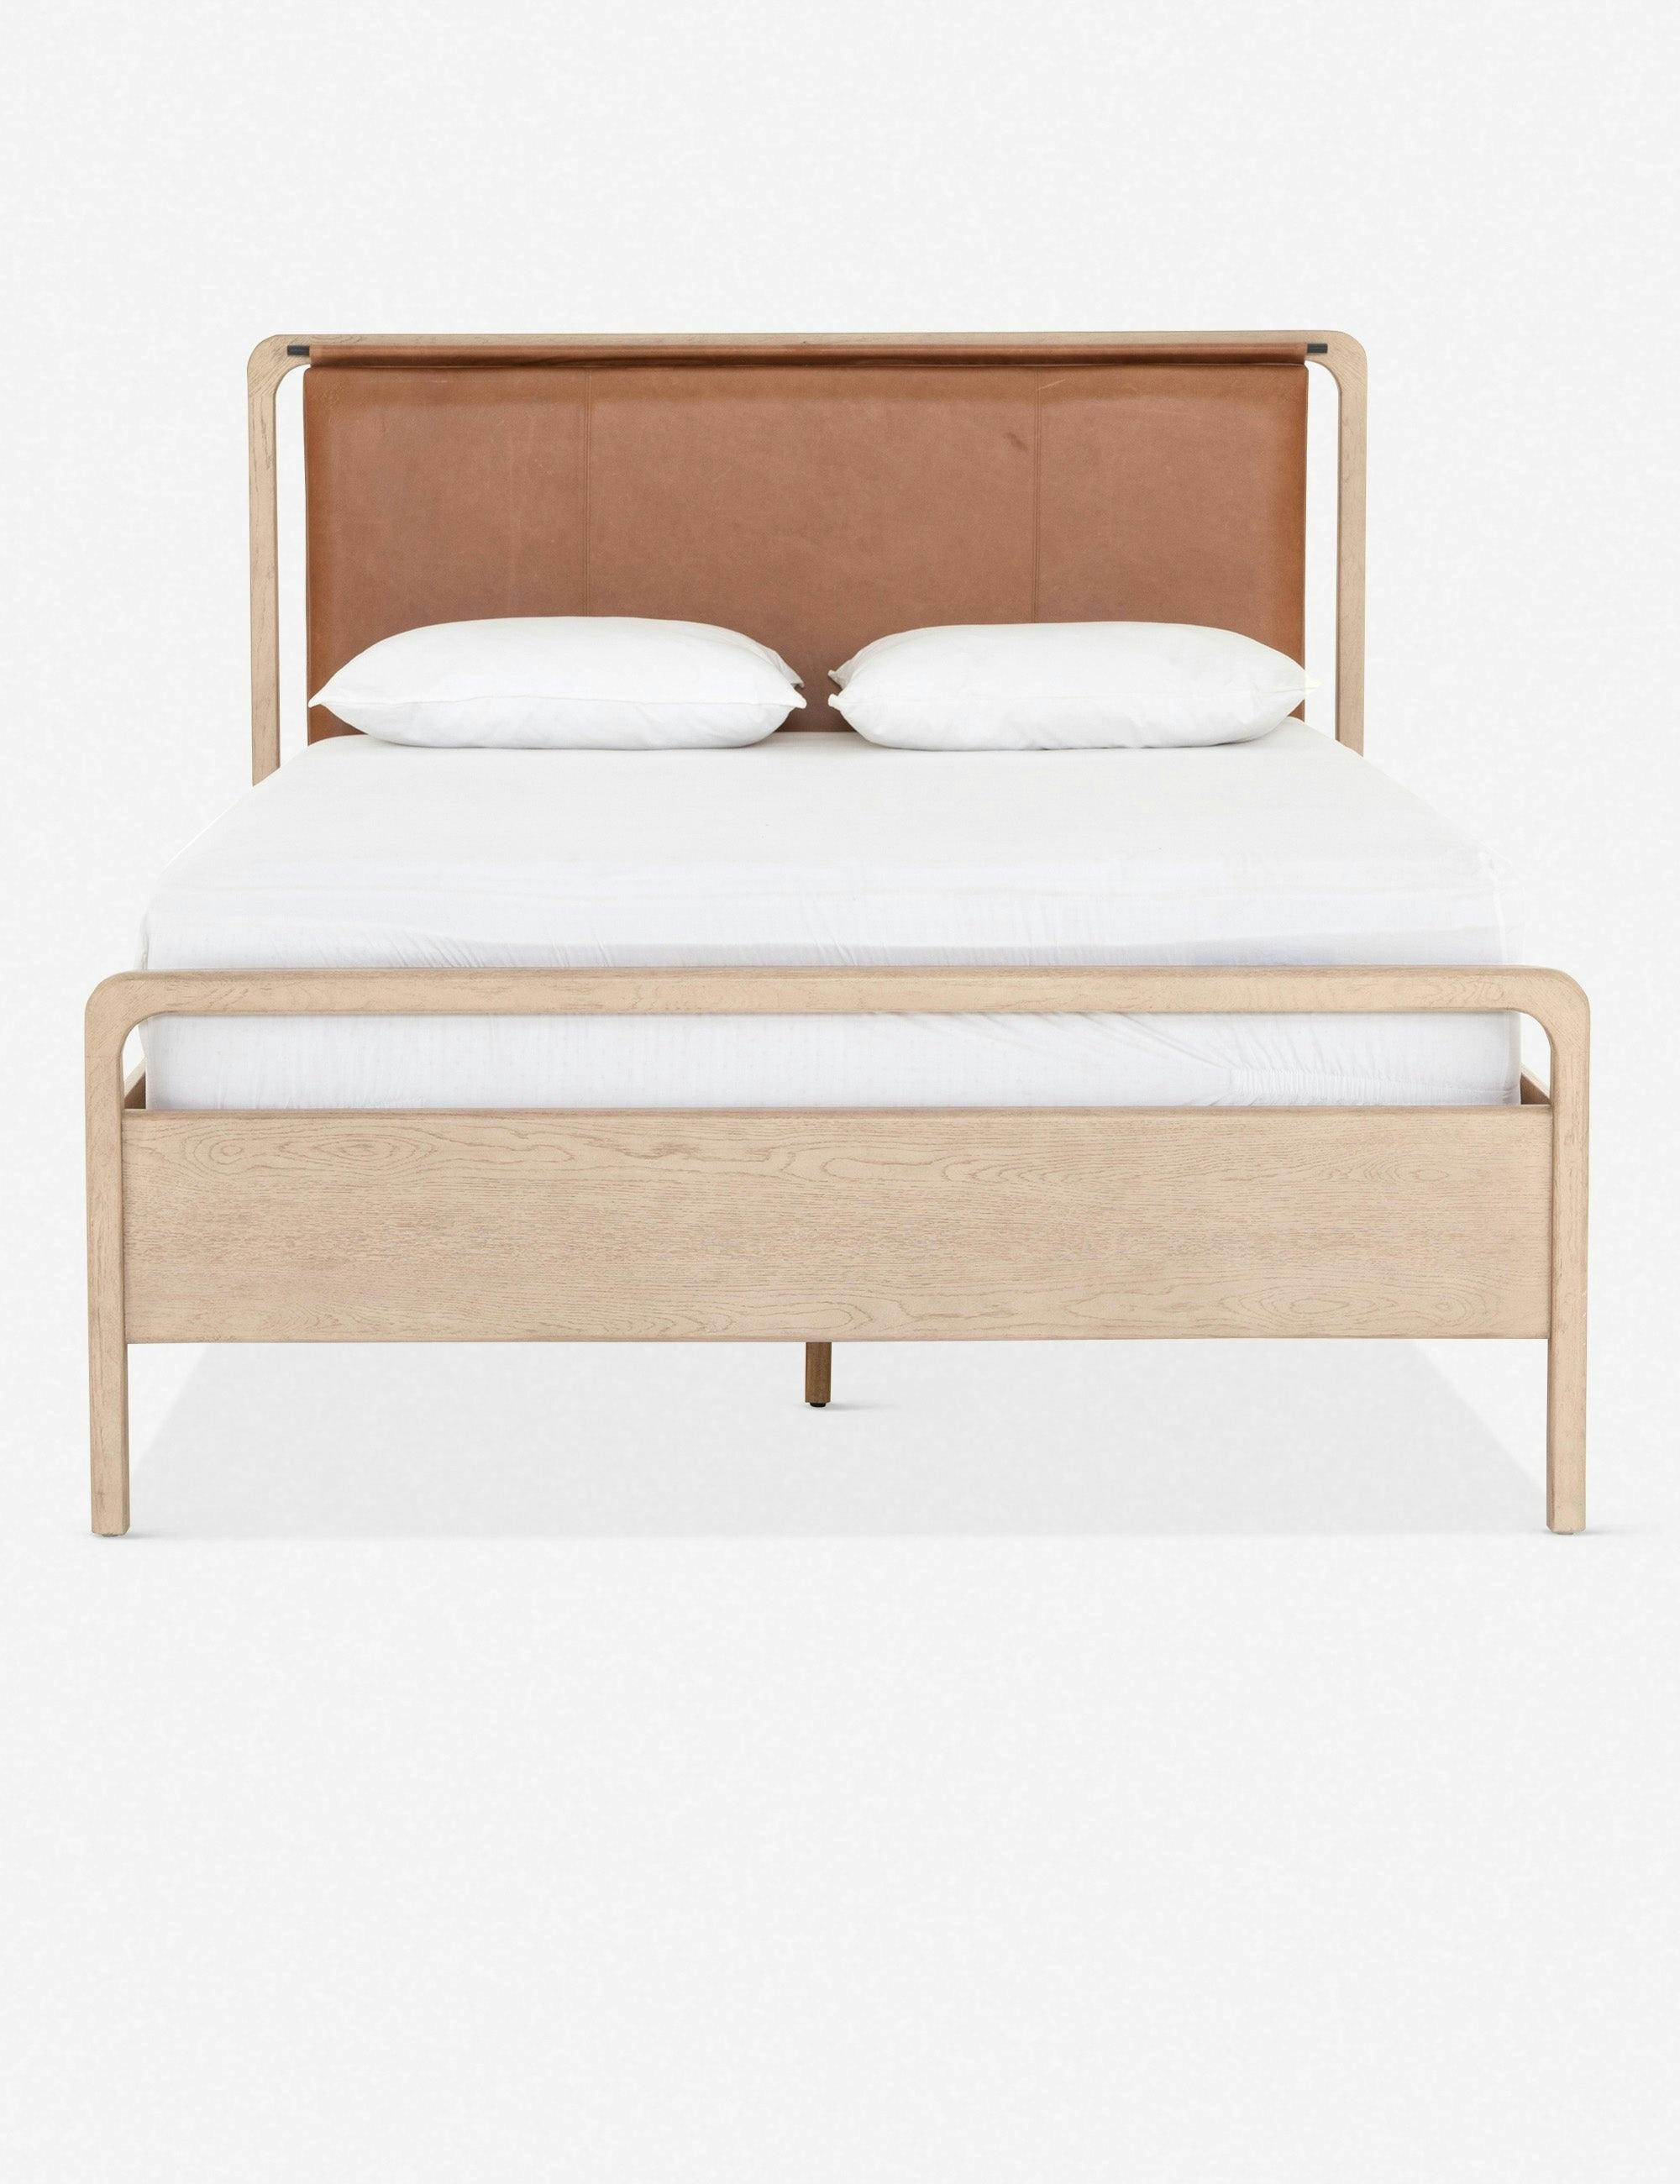 Modern Washed Oak King Bed with Tan Leather Headboard